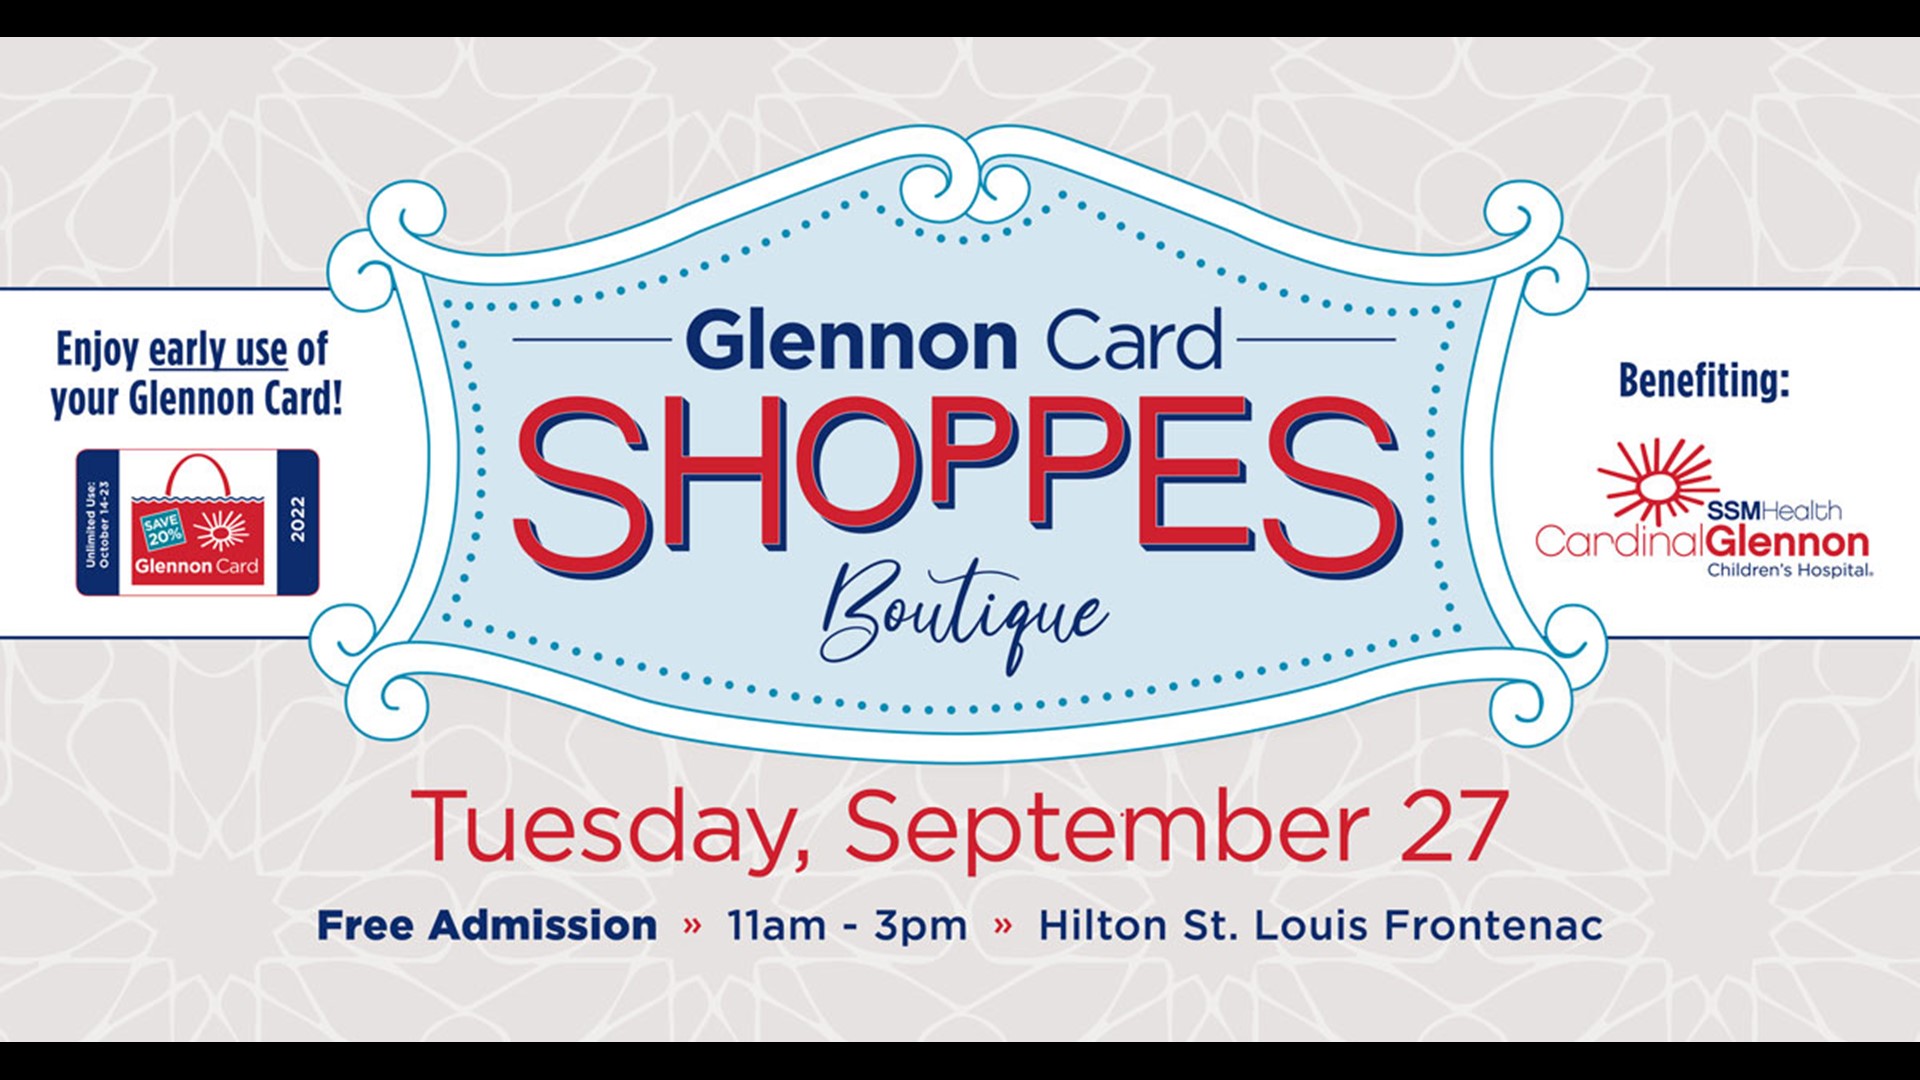 Join the Glennon Guild on Tuesday, September 27, 11AM - 3PM for an early "Shopportunity" to kick-off Glennon Card Days.’